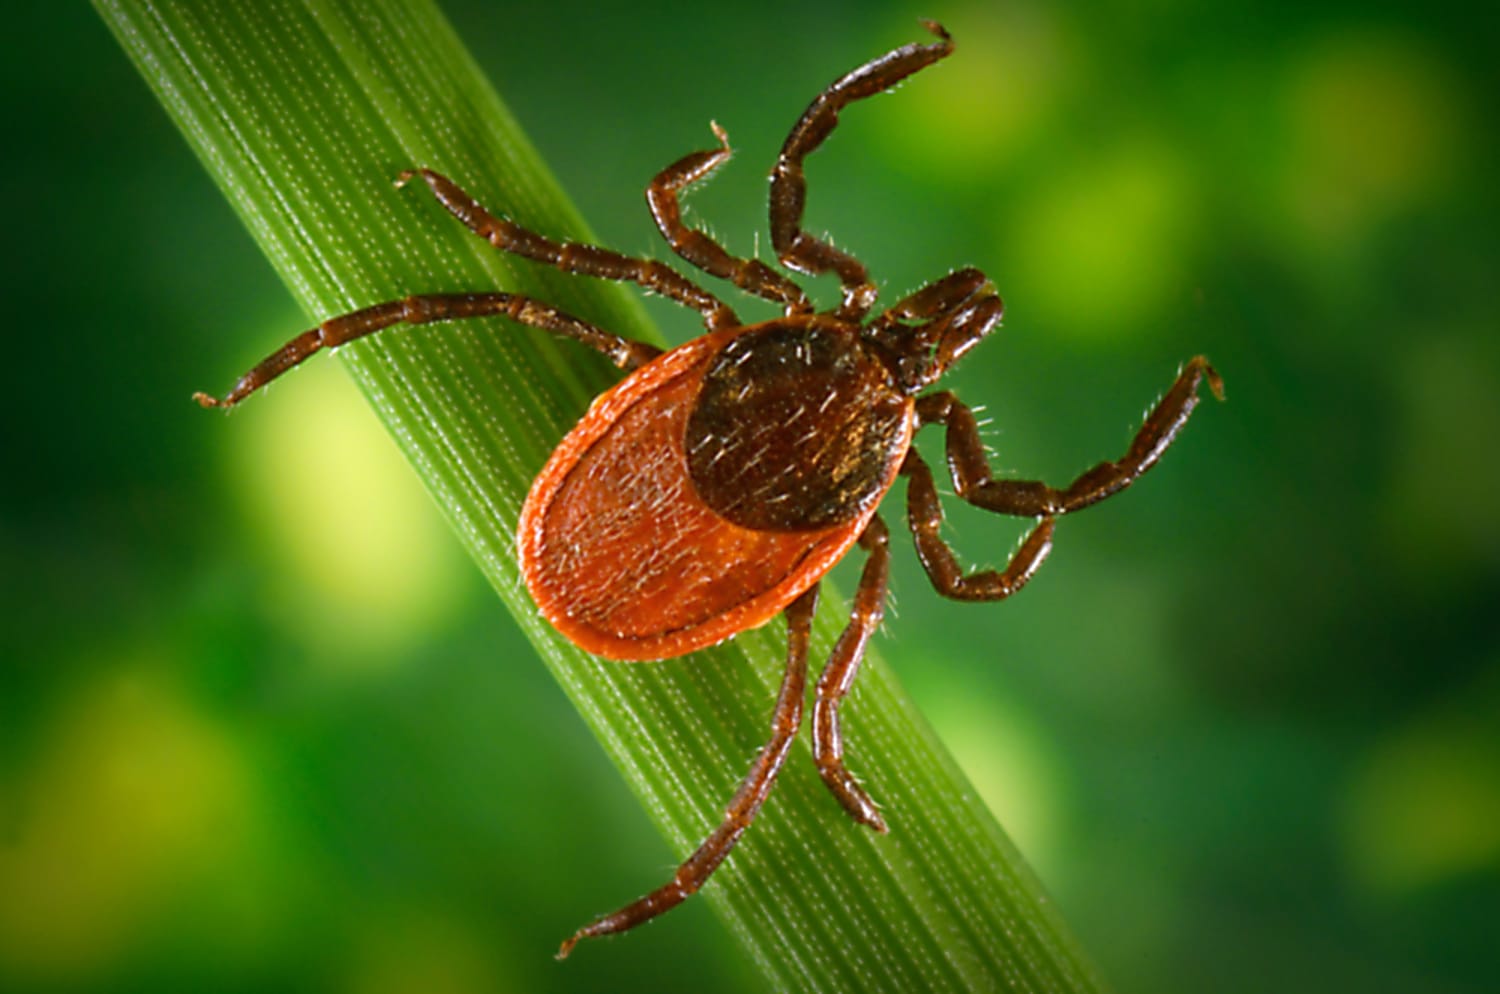 Pfizer begins a late-stage clinical trial testing its Lyme disease vaccine